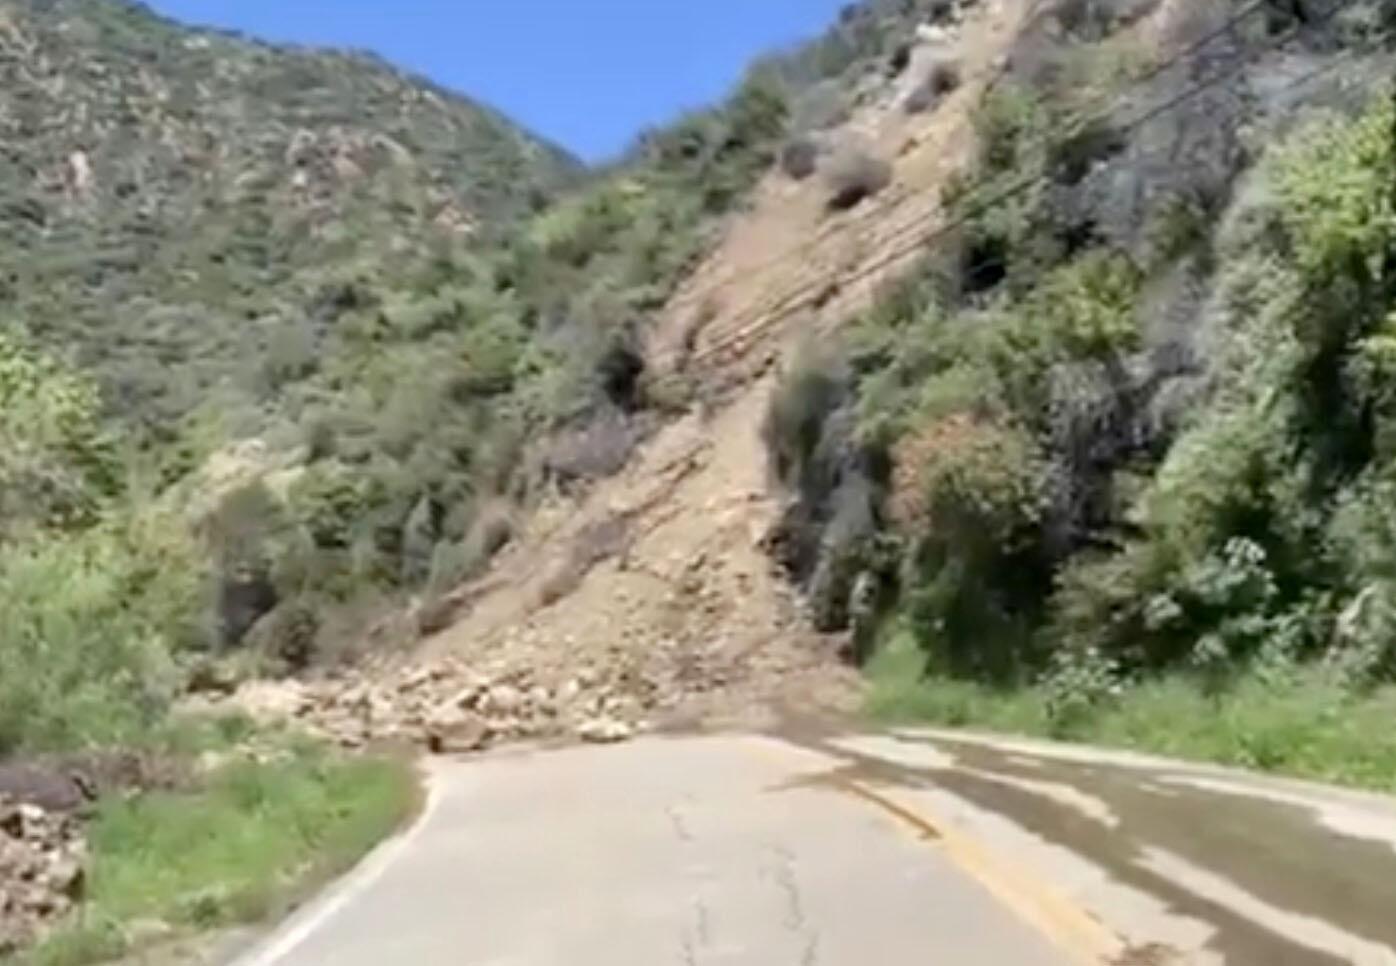 Topanga Canyon still closed by landslide, won't be cleared till fall